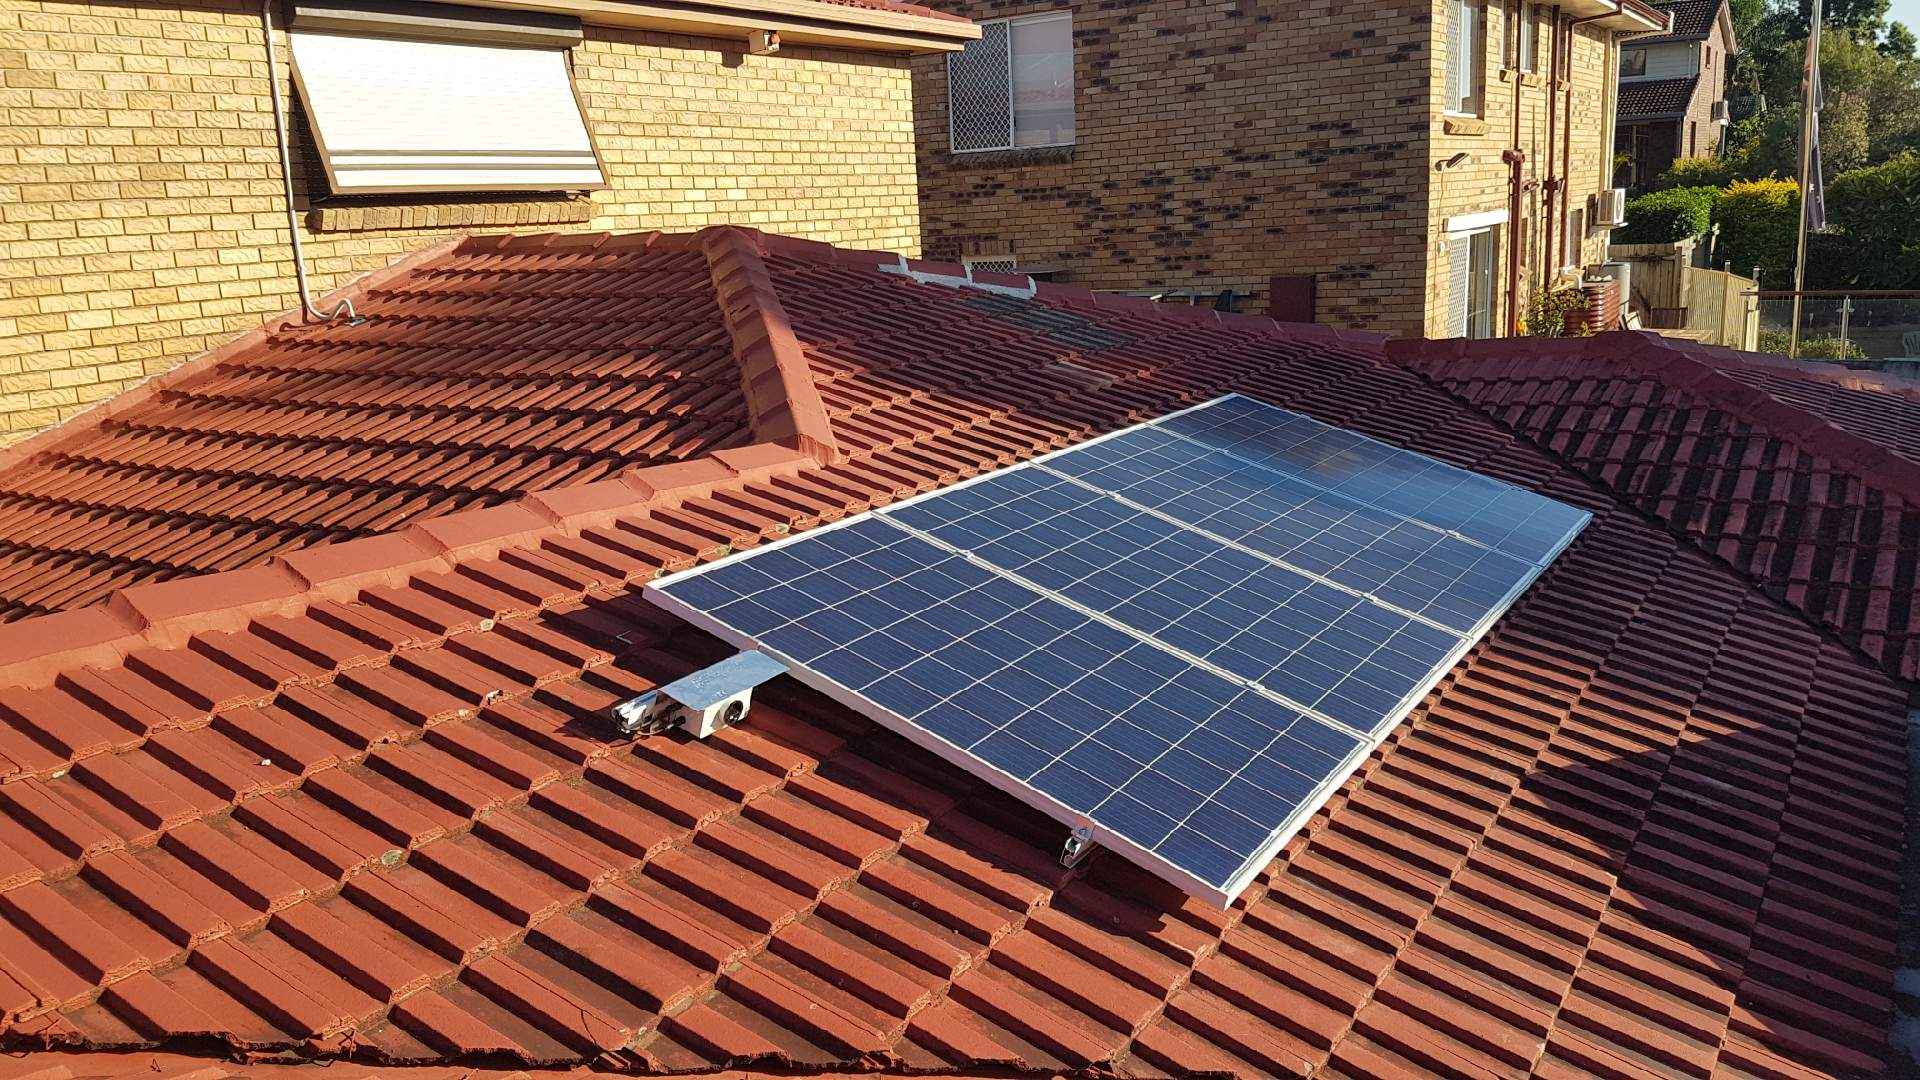 GI Energy | Residential and Commercial Solar Power Systems